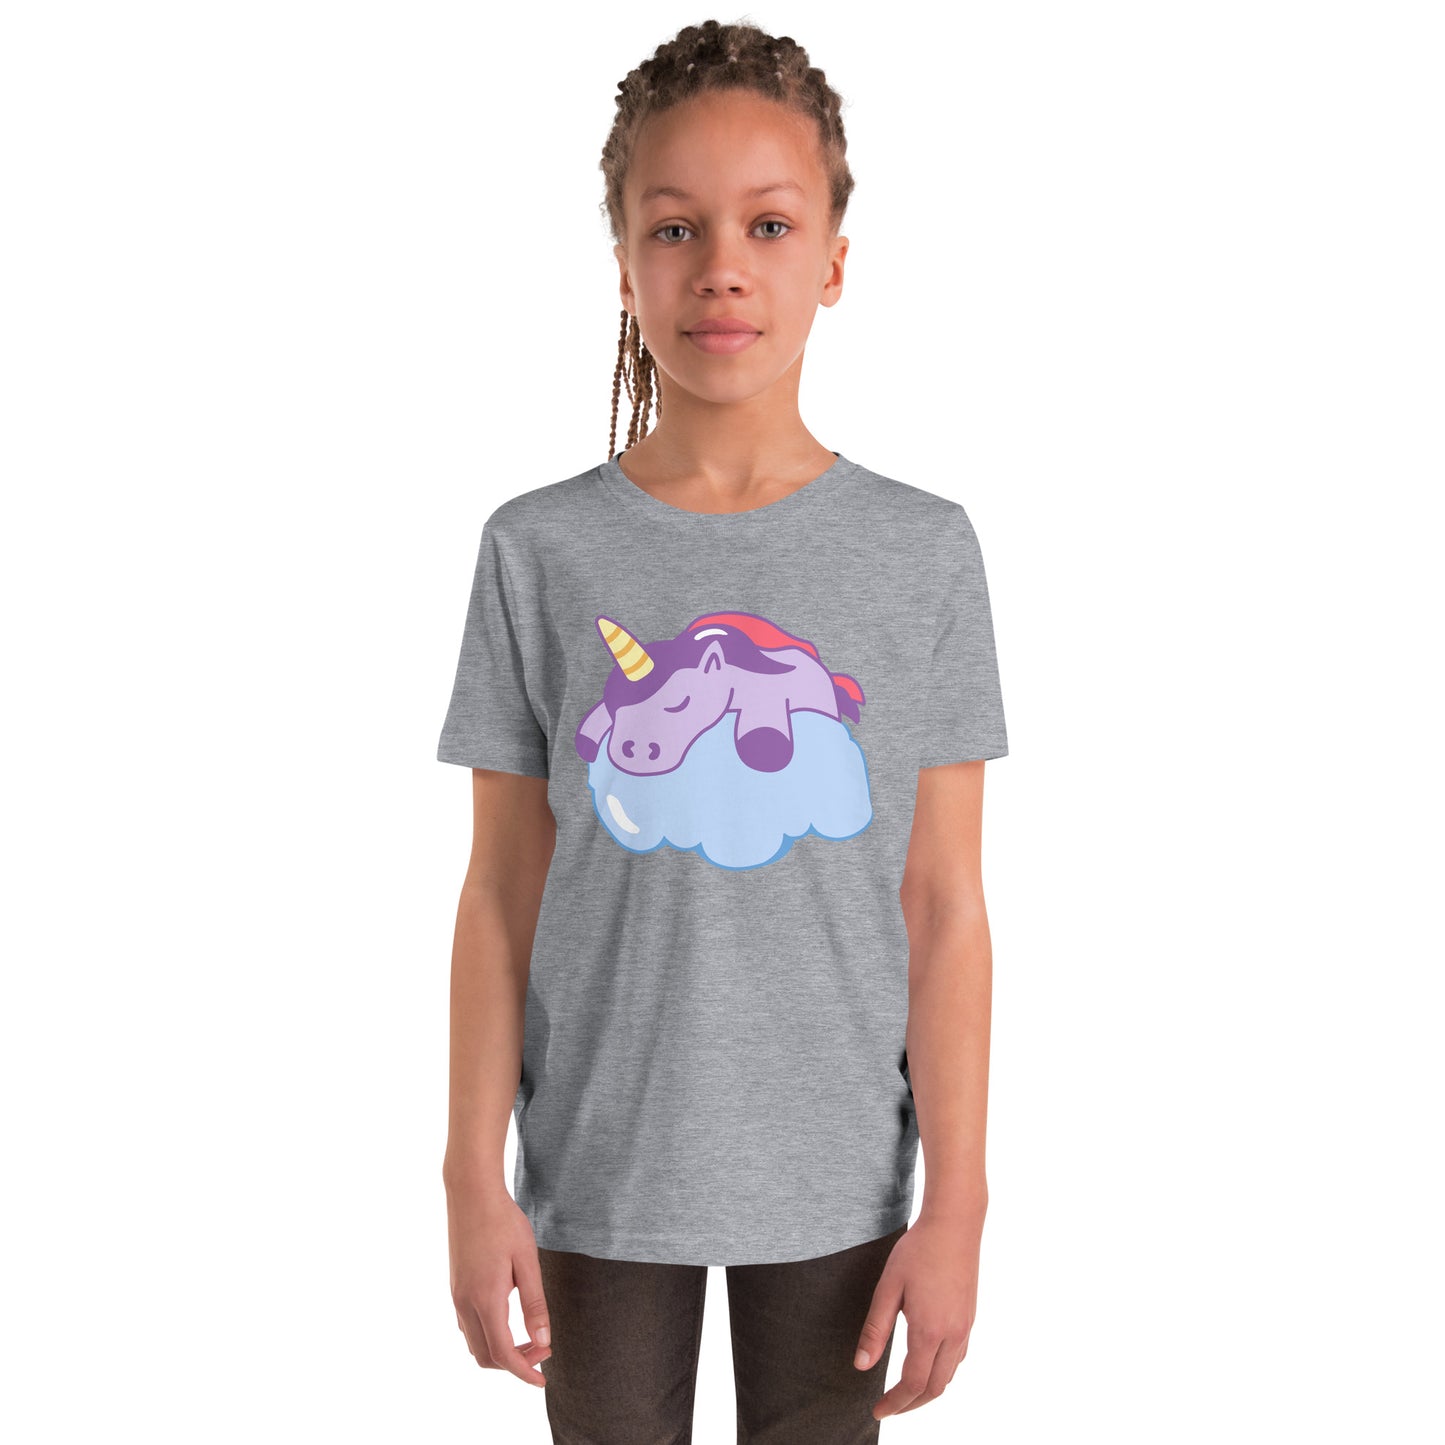 Youth with a grey T-shirt with a print of a sleeping unicorn on a cloud